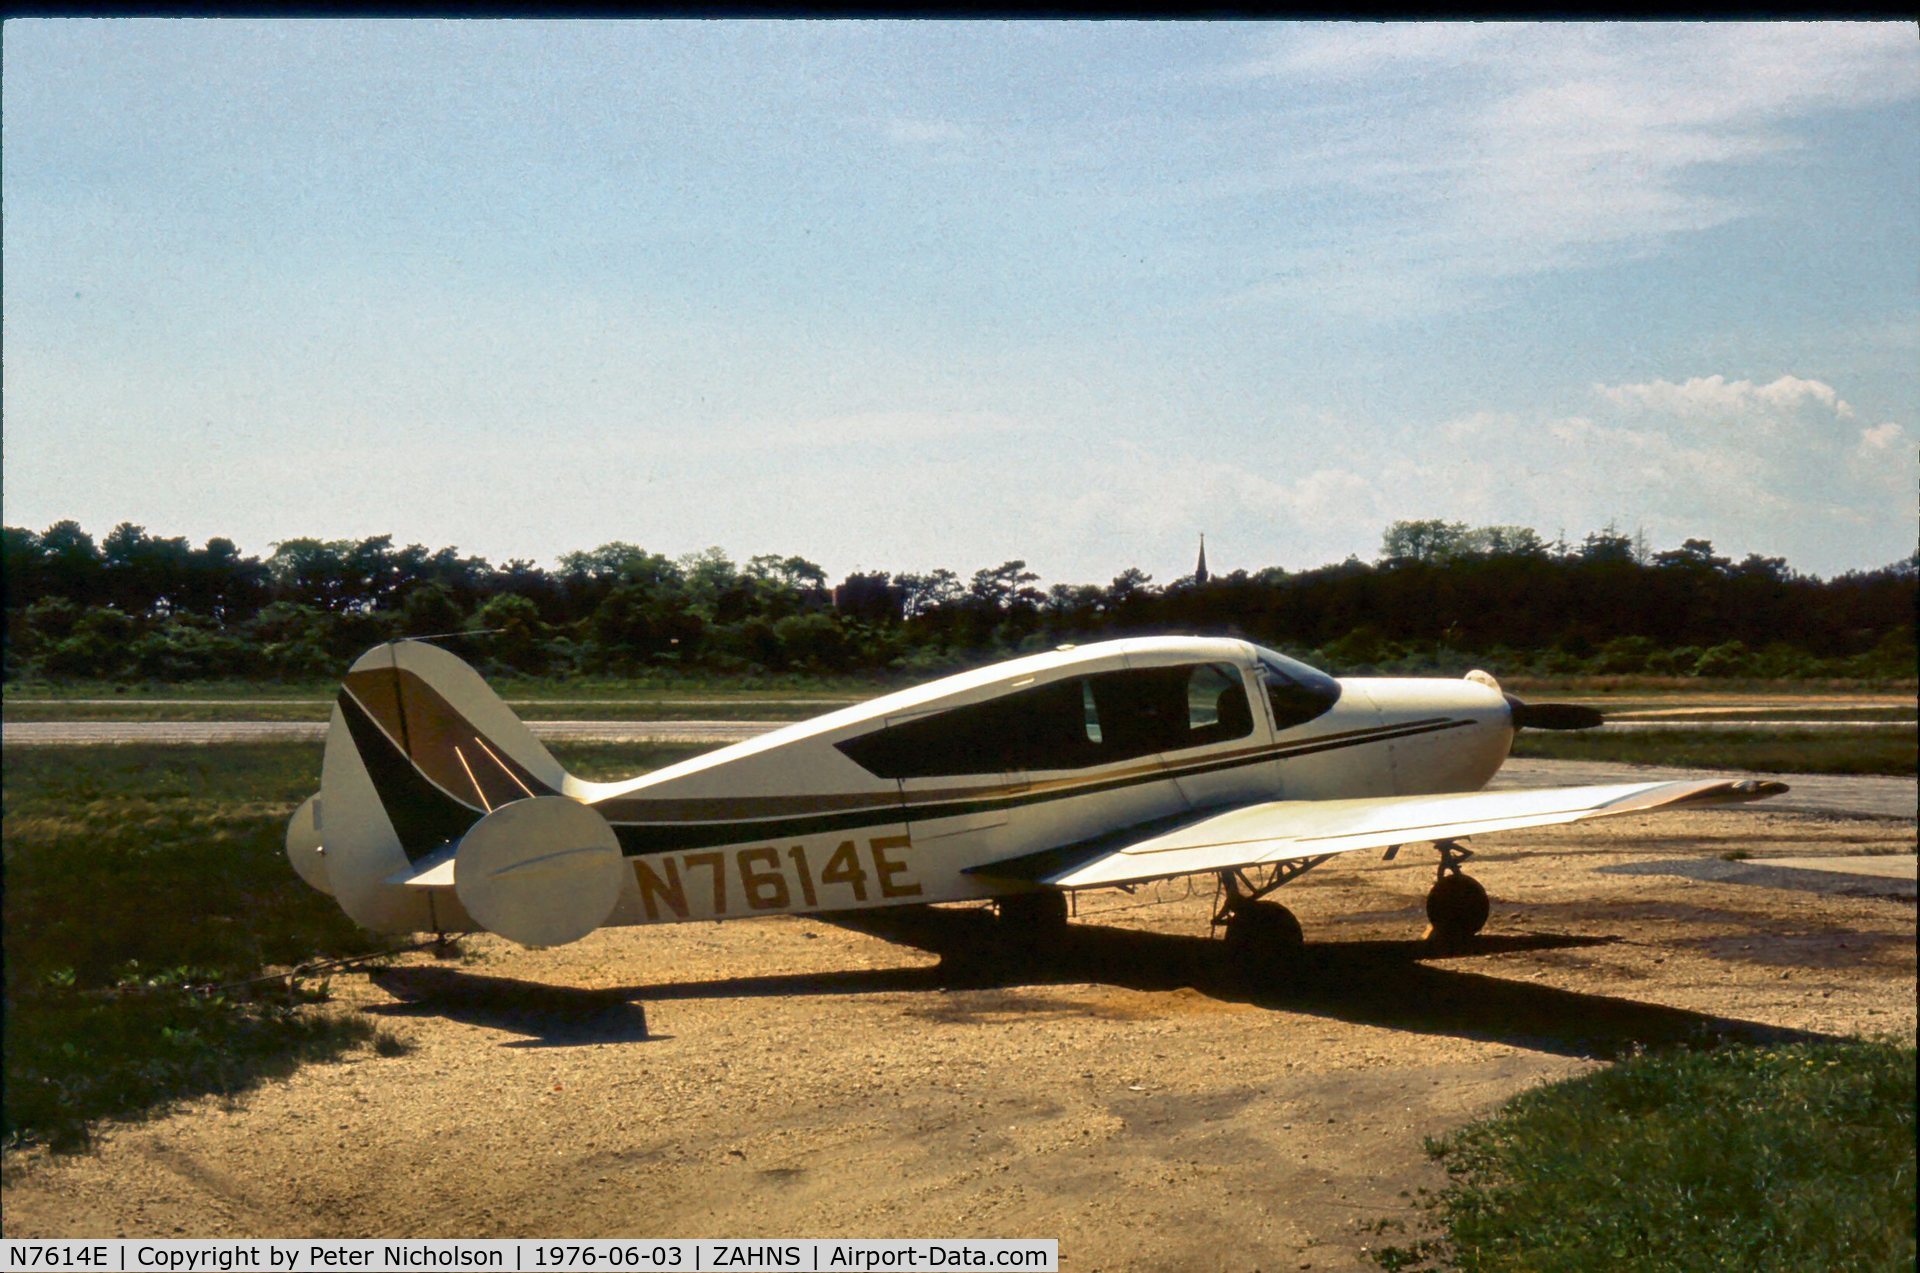 N7614E, 1959 Downer Bellanca 14-19-3 C/N 4116, Seen in 1976 and 1977 at Zahns Airfield, Amityville, Long Island - closed in 1980